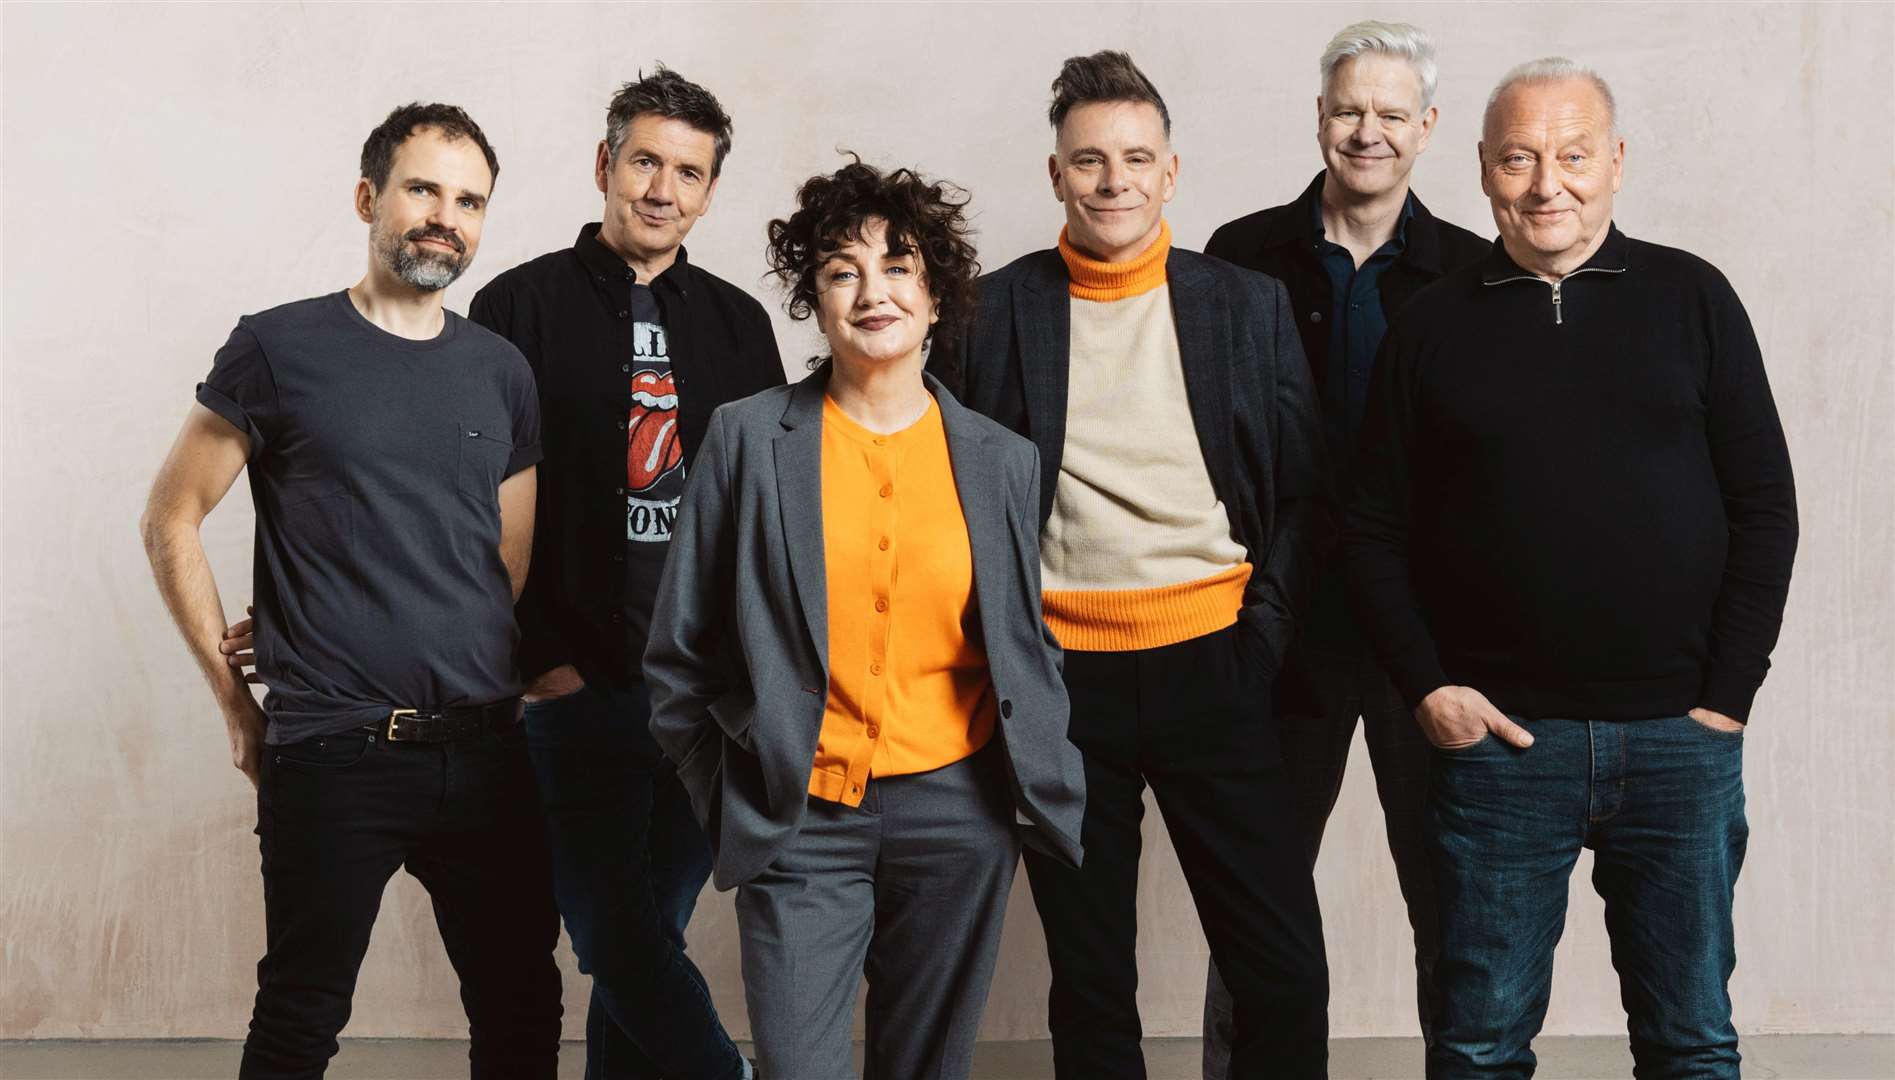 Glasgow-based band Deacon Blue will bring their greatest hits to fans. Picture: Cameron Brisbane